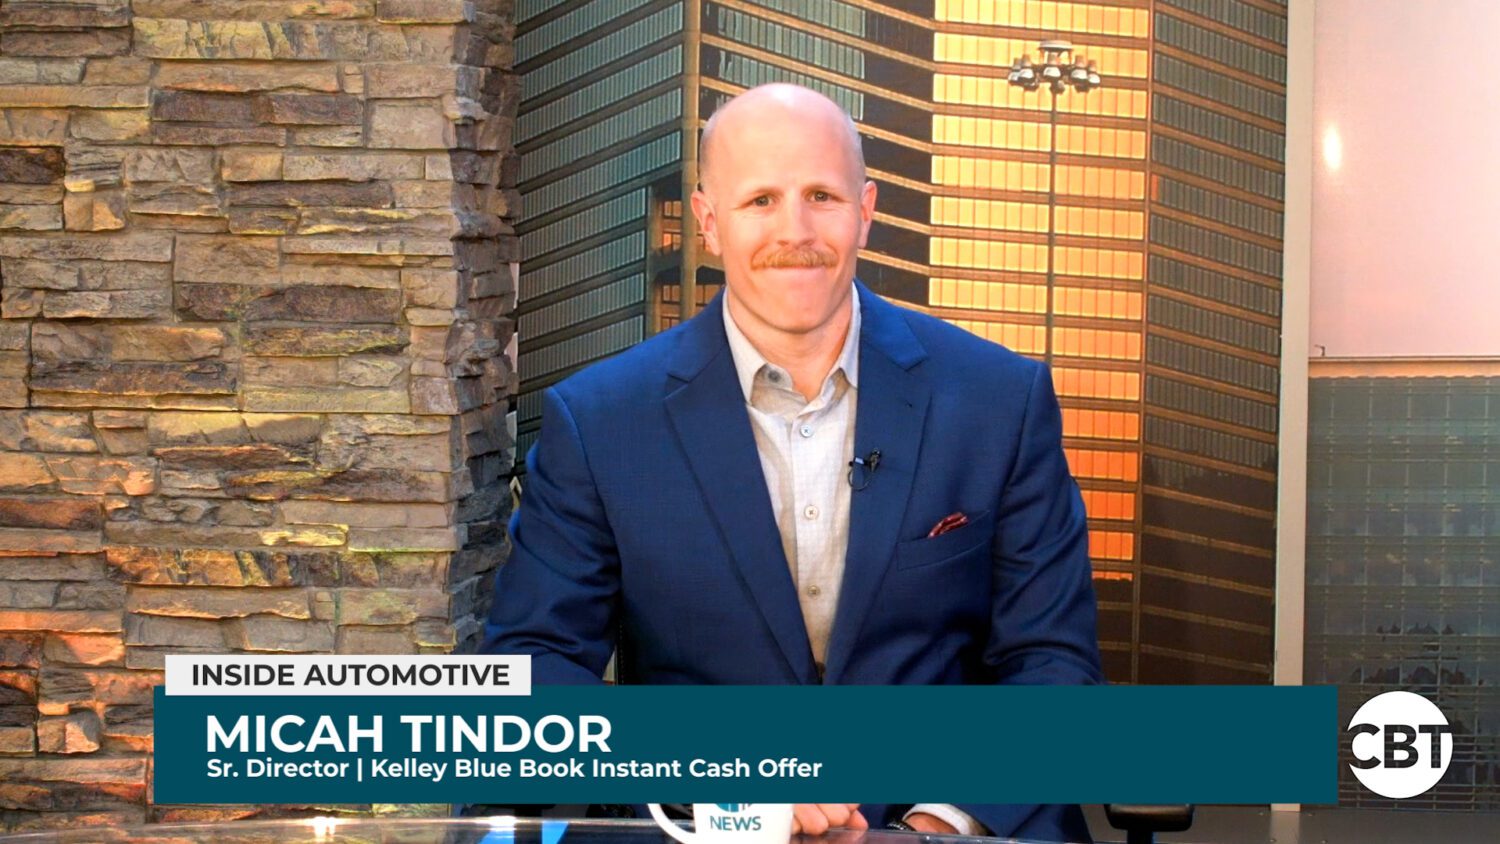 Micah Tindor, the senior director of Kelley Blue Book Instant Cash Offer, joins Inside Automotive to discuss vehicle trade-in pain points.